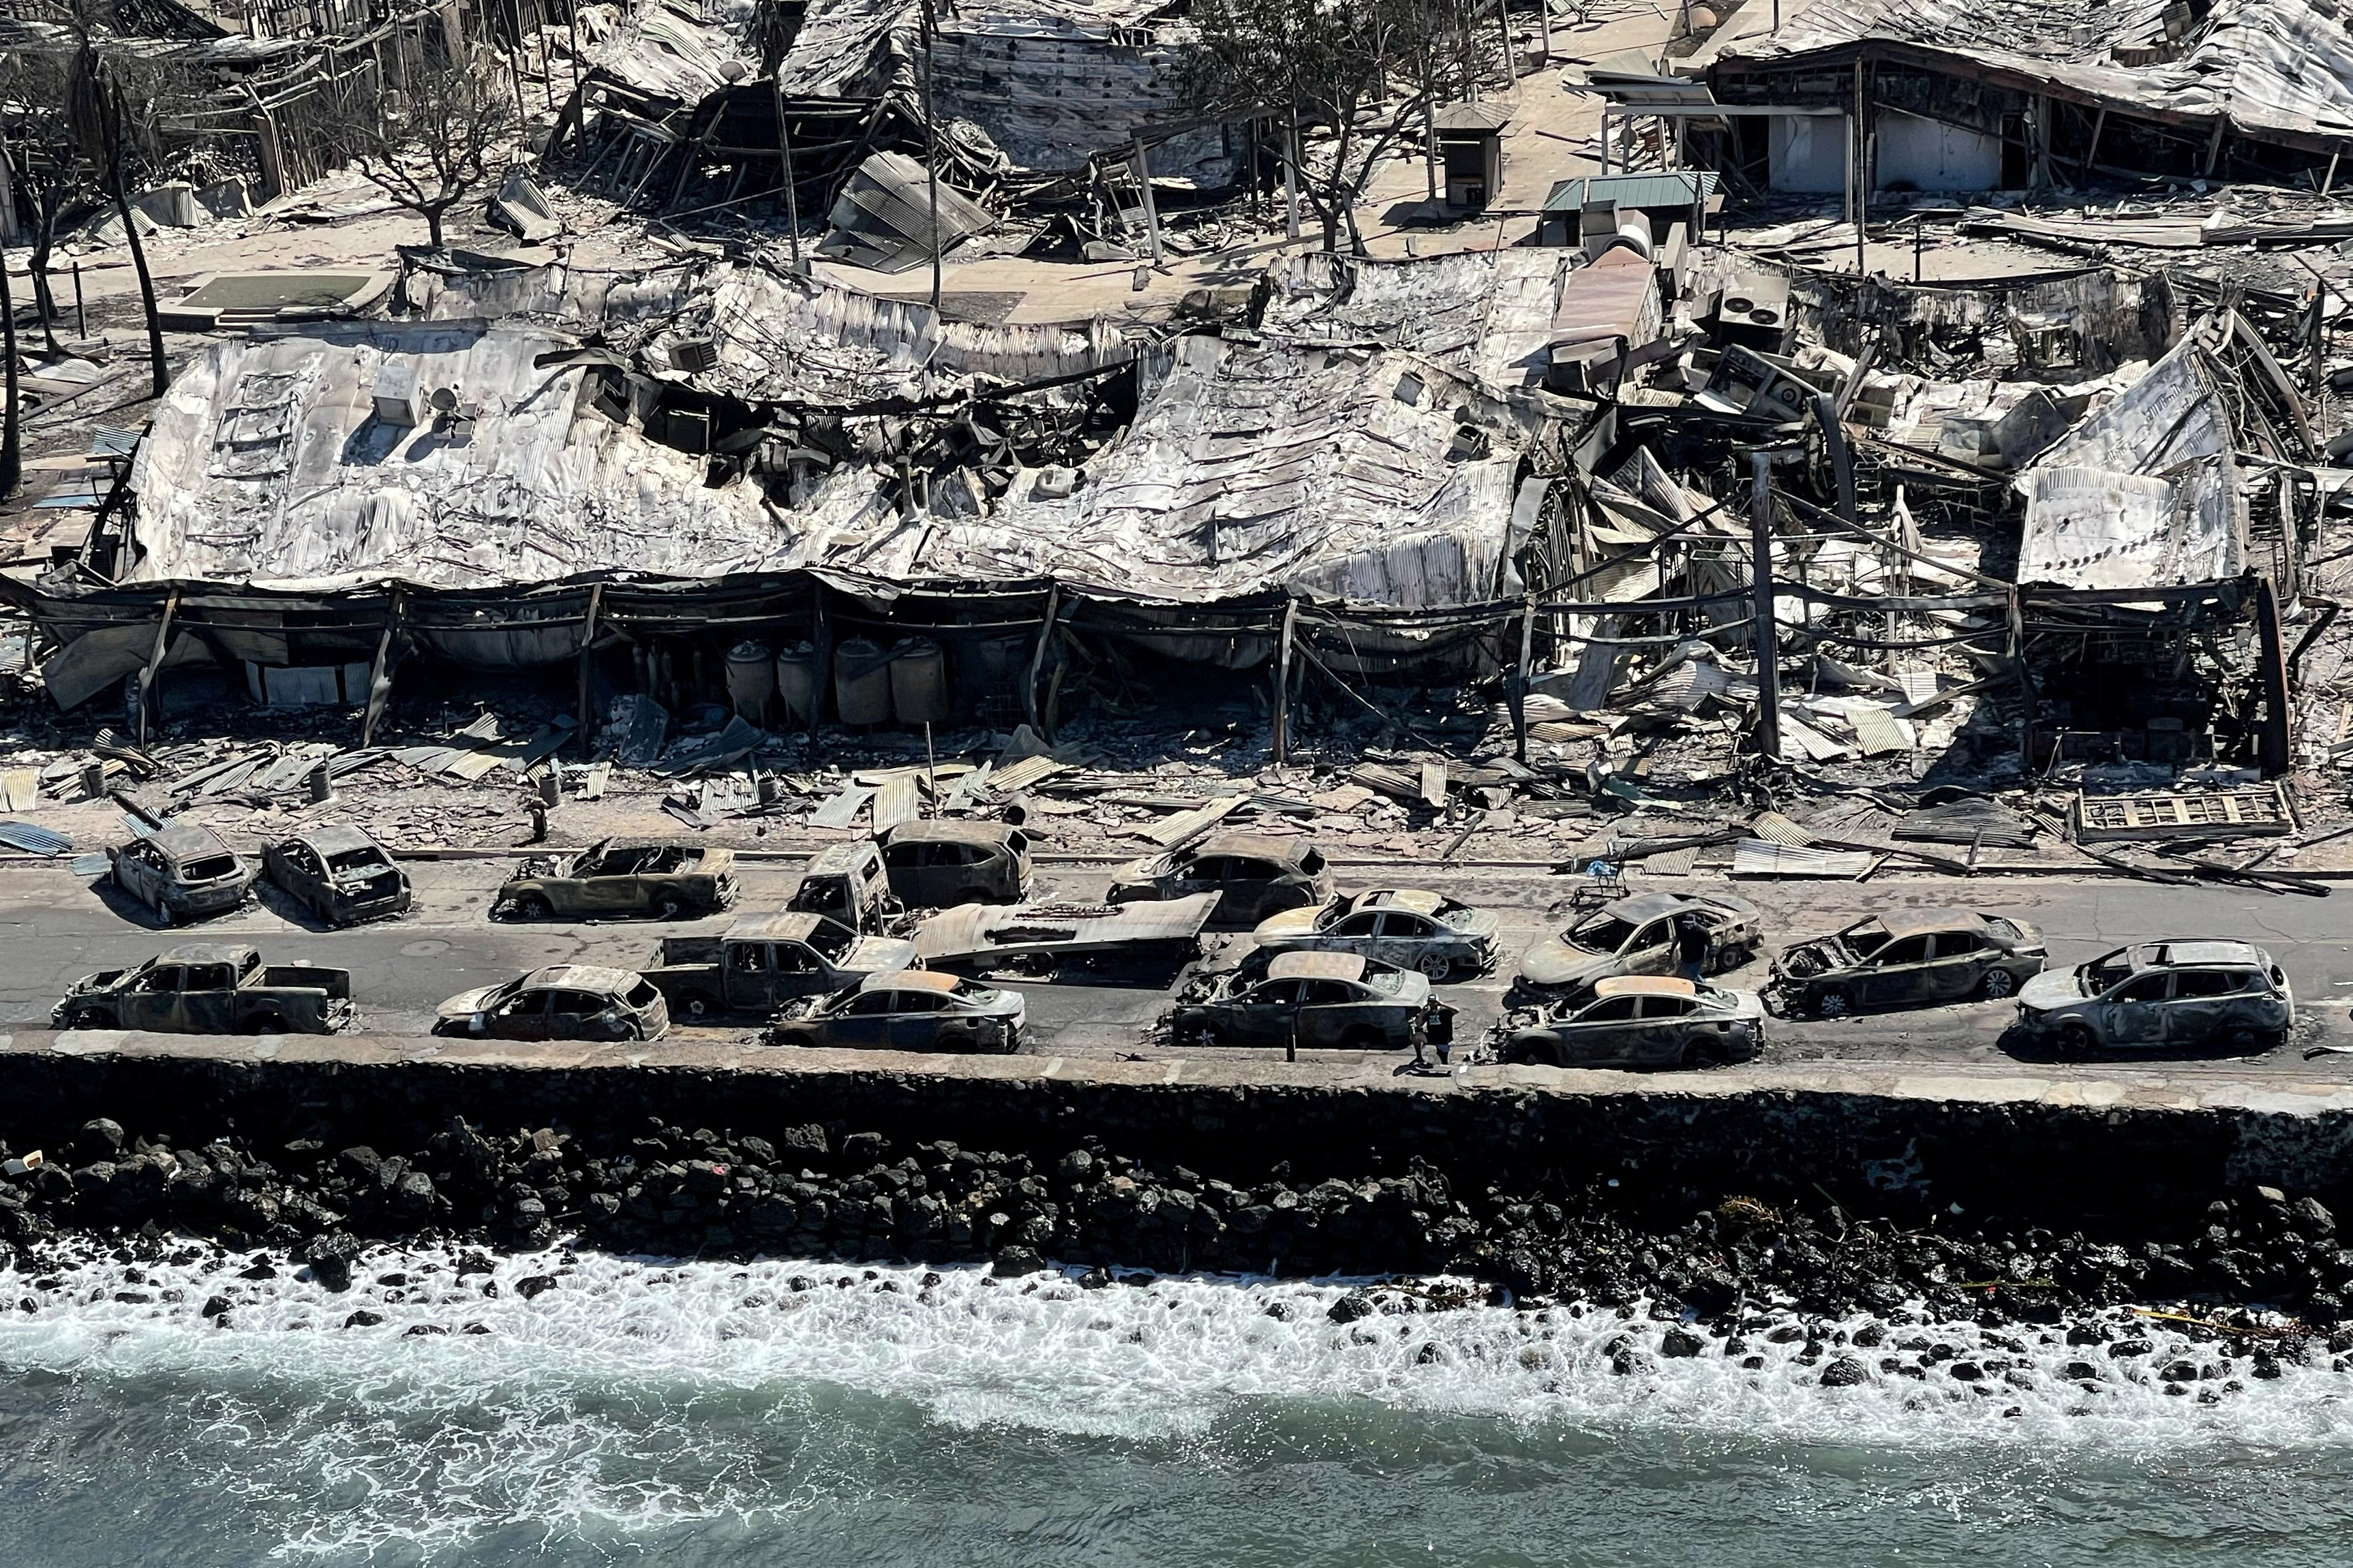 The shells of burned houses and buildings are left after wildfires in Lahaina